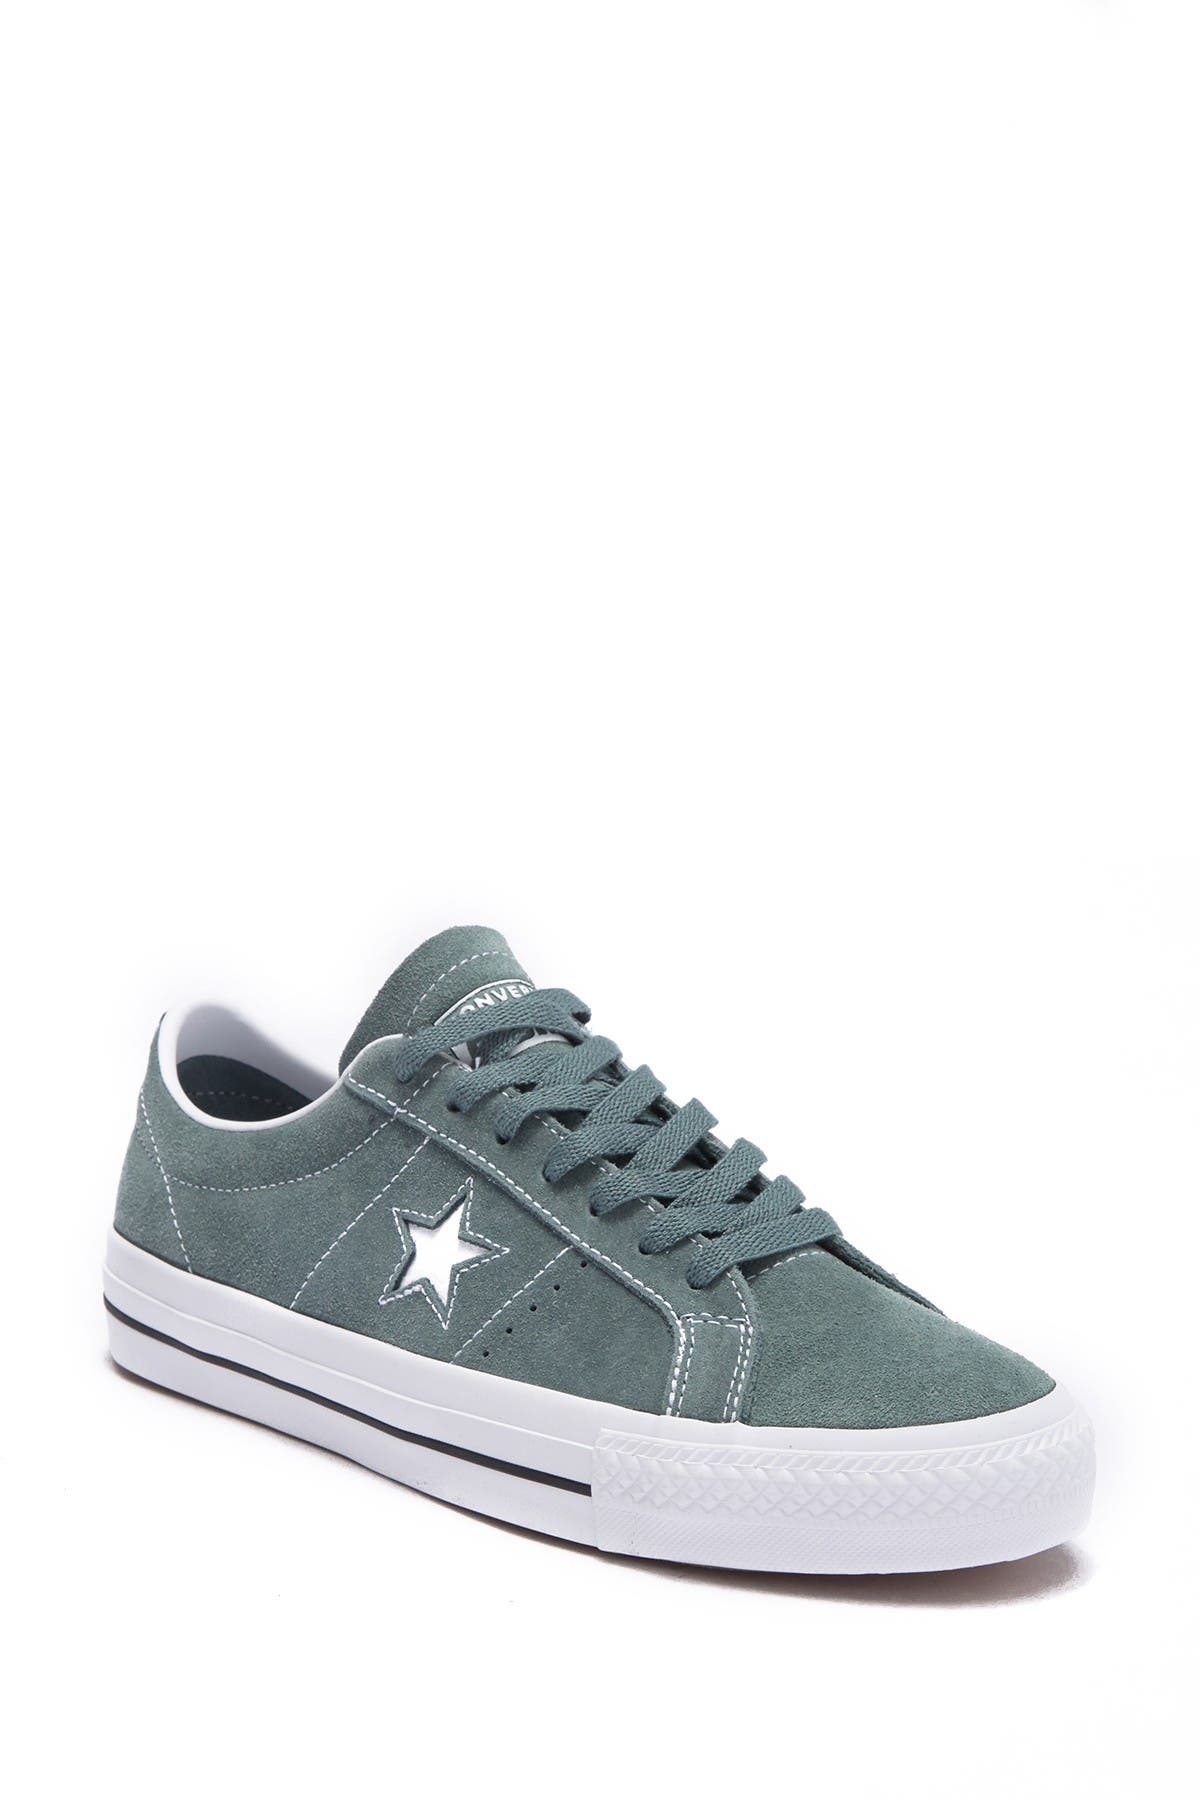 converse one star oxford